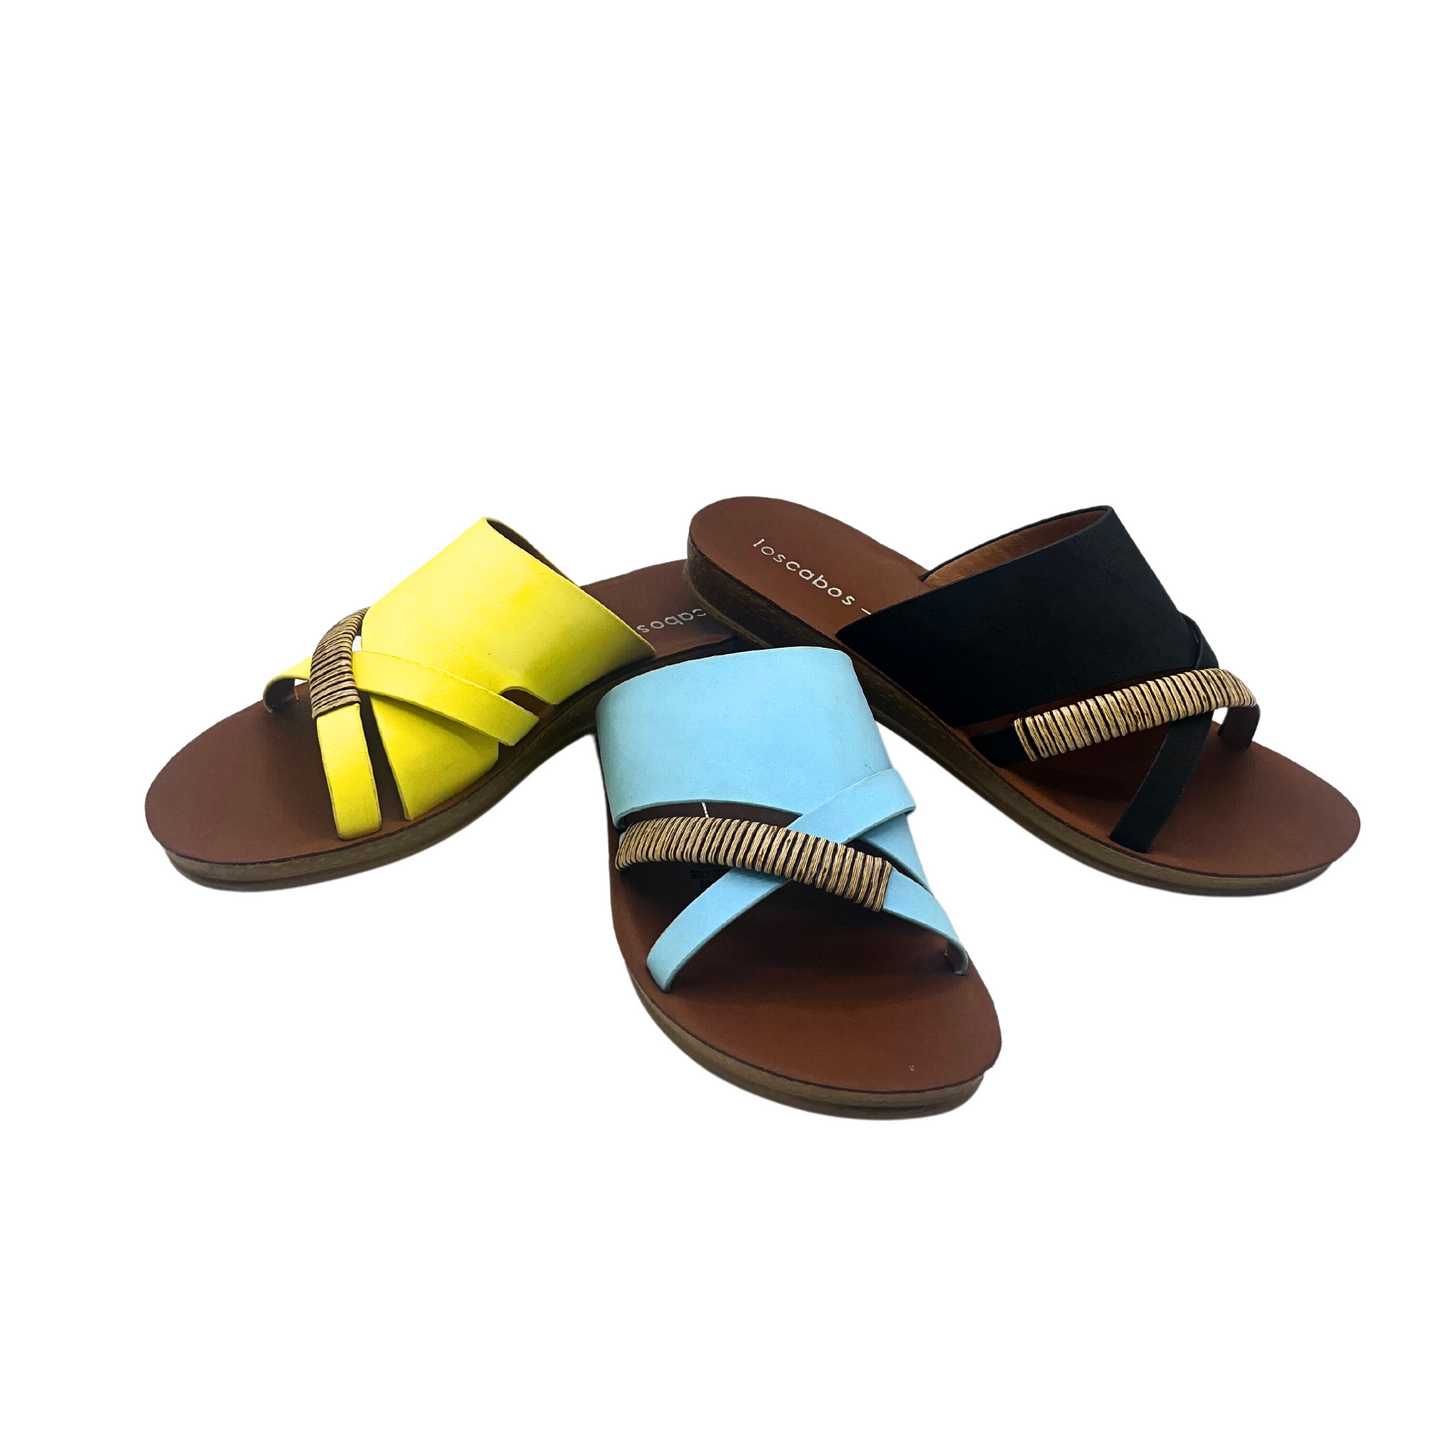 Front view of a flat sandal in 3 colors - yellow, blue and black